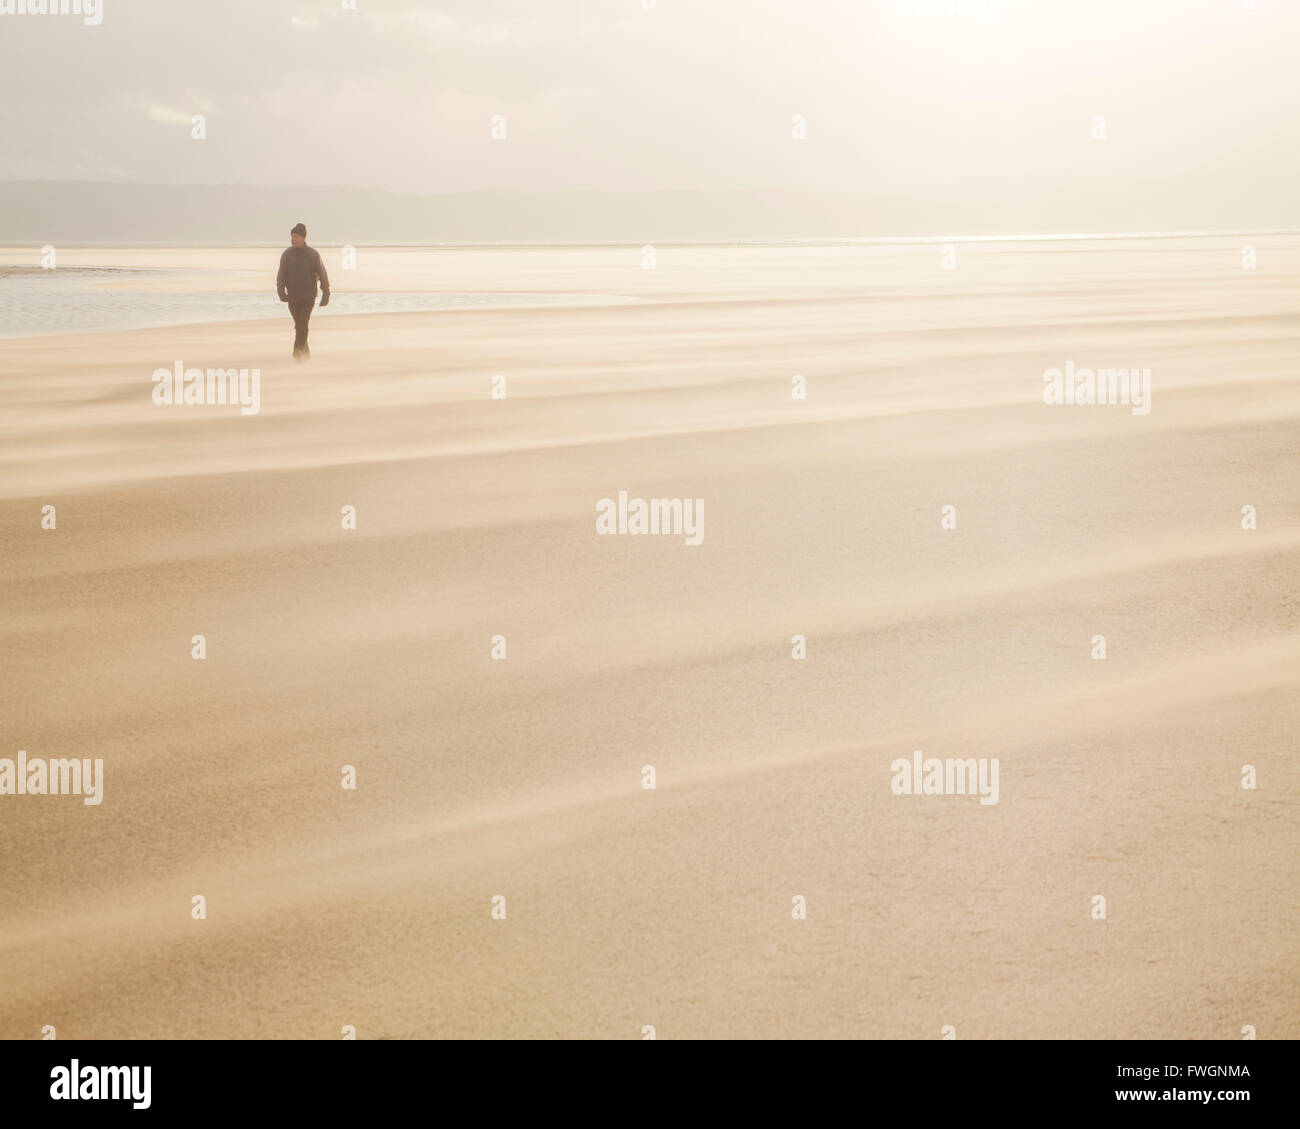 Man walking across a windy beach with dry shifting sands creating a cloud underfoot, West Kirkby, Wirral, England Stock Photo